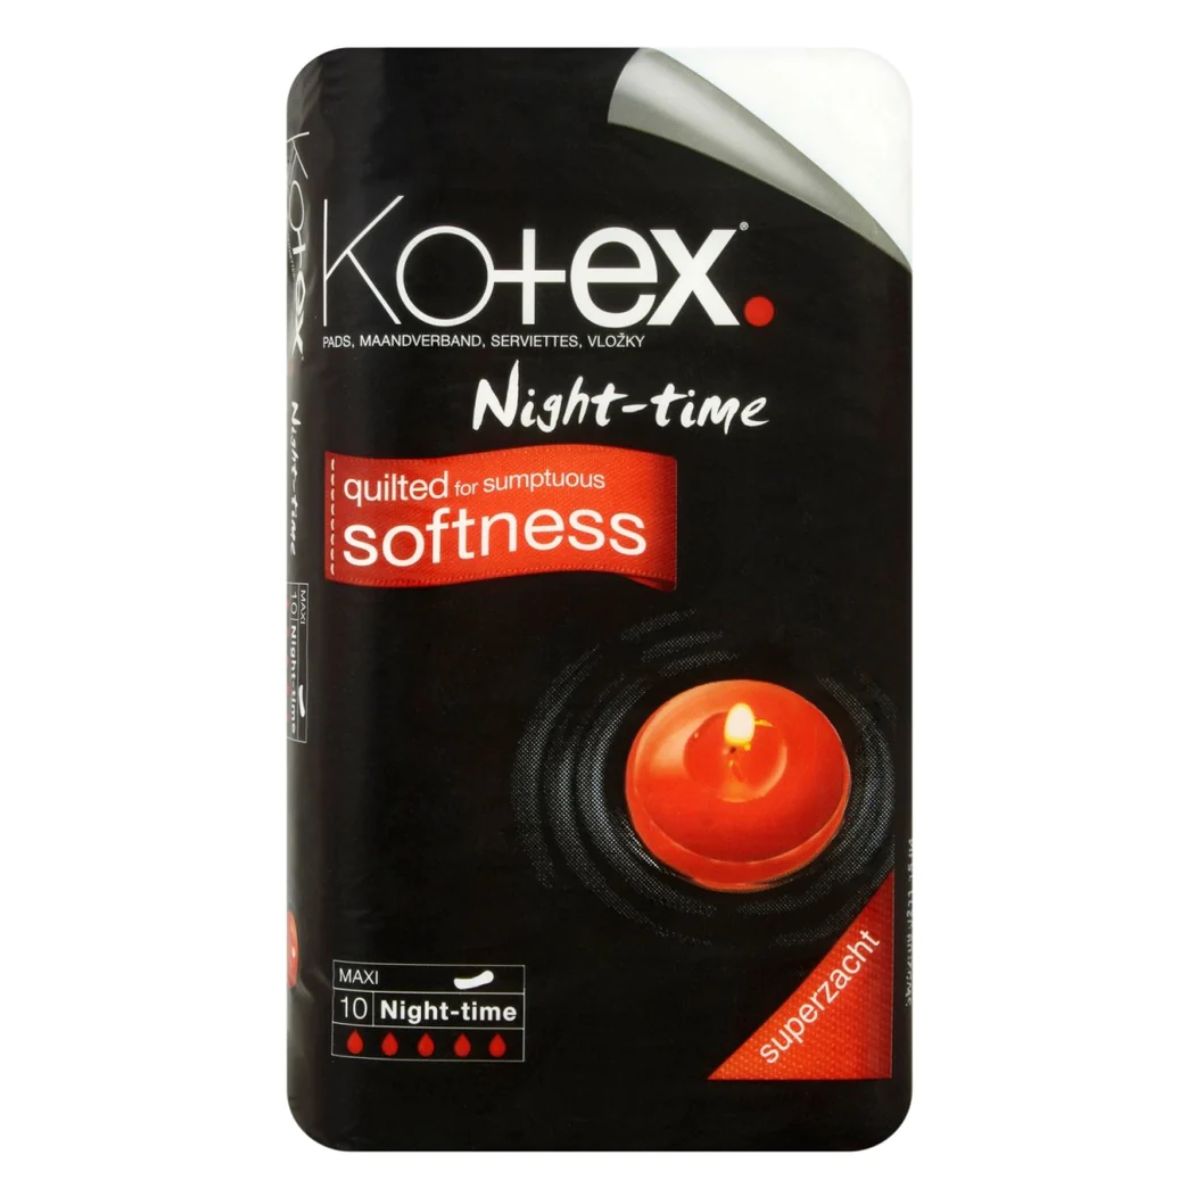 A package of Kotex Night Time Maxi Pads with 10 pieces, advertised as quilted for sumptuous softness.